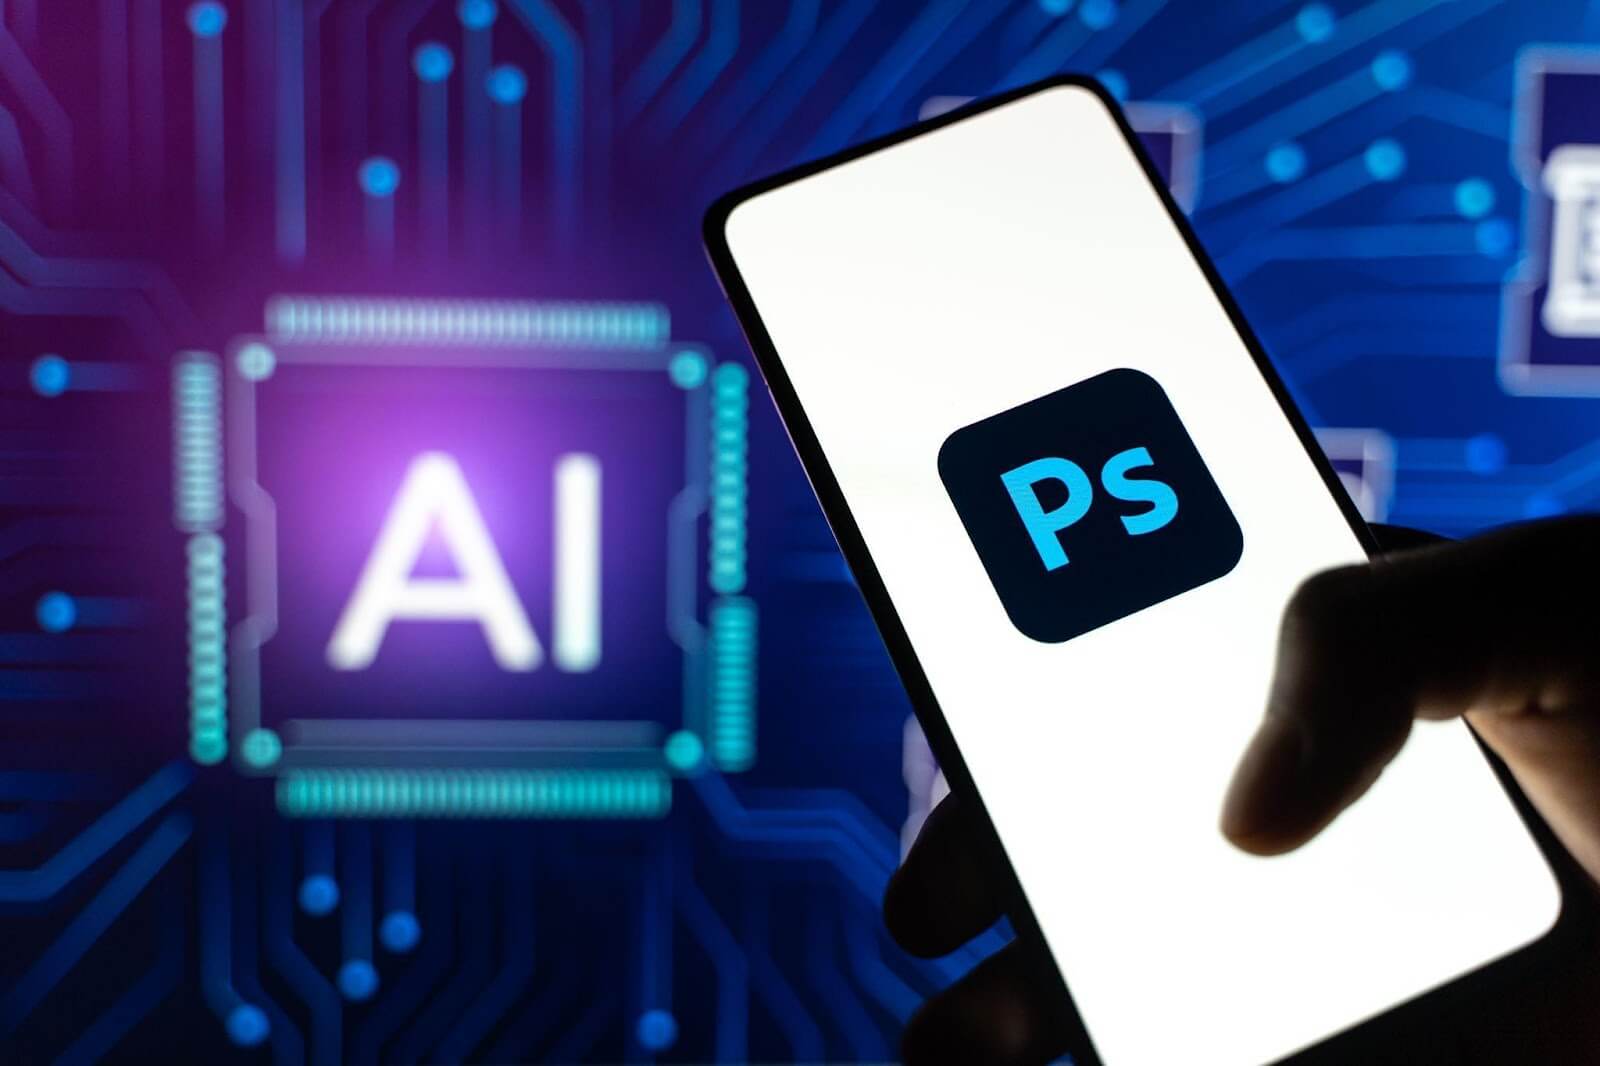 Photoshop AI What It Is and How It Can Enhance Your Images